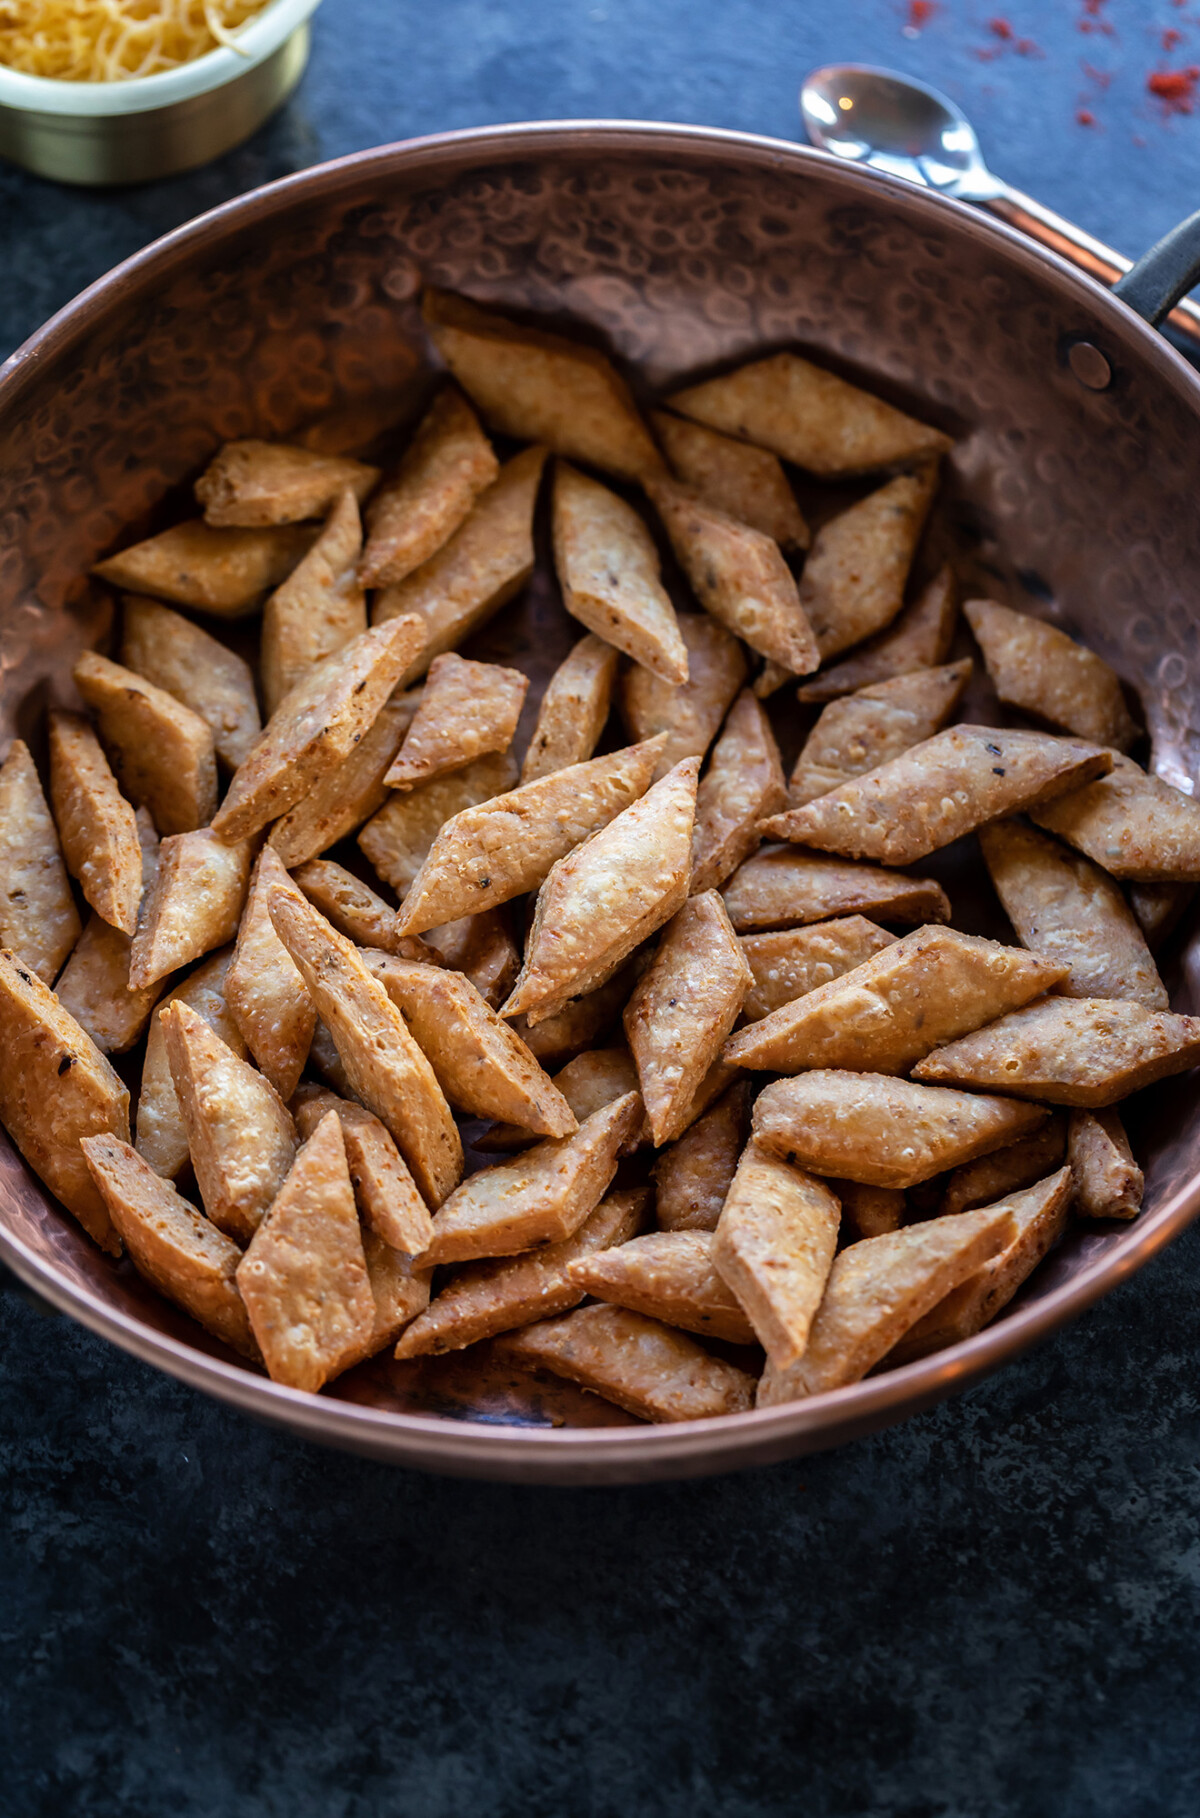 fried diamond shaped snack served in a copper round bowl